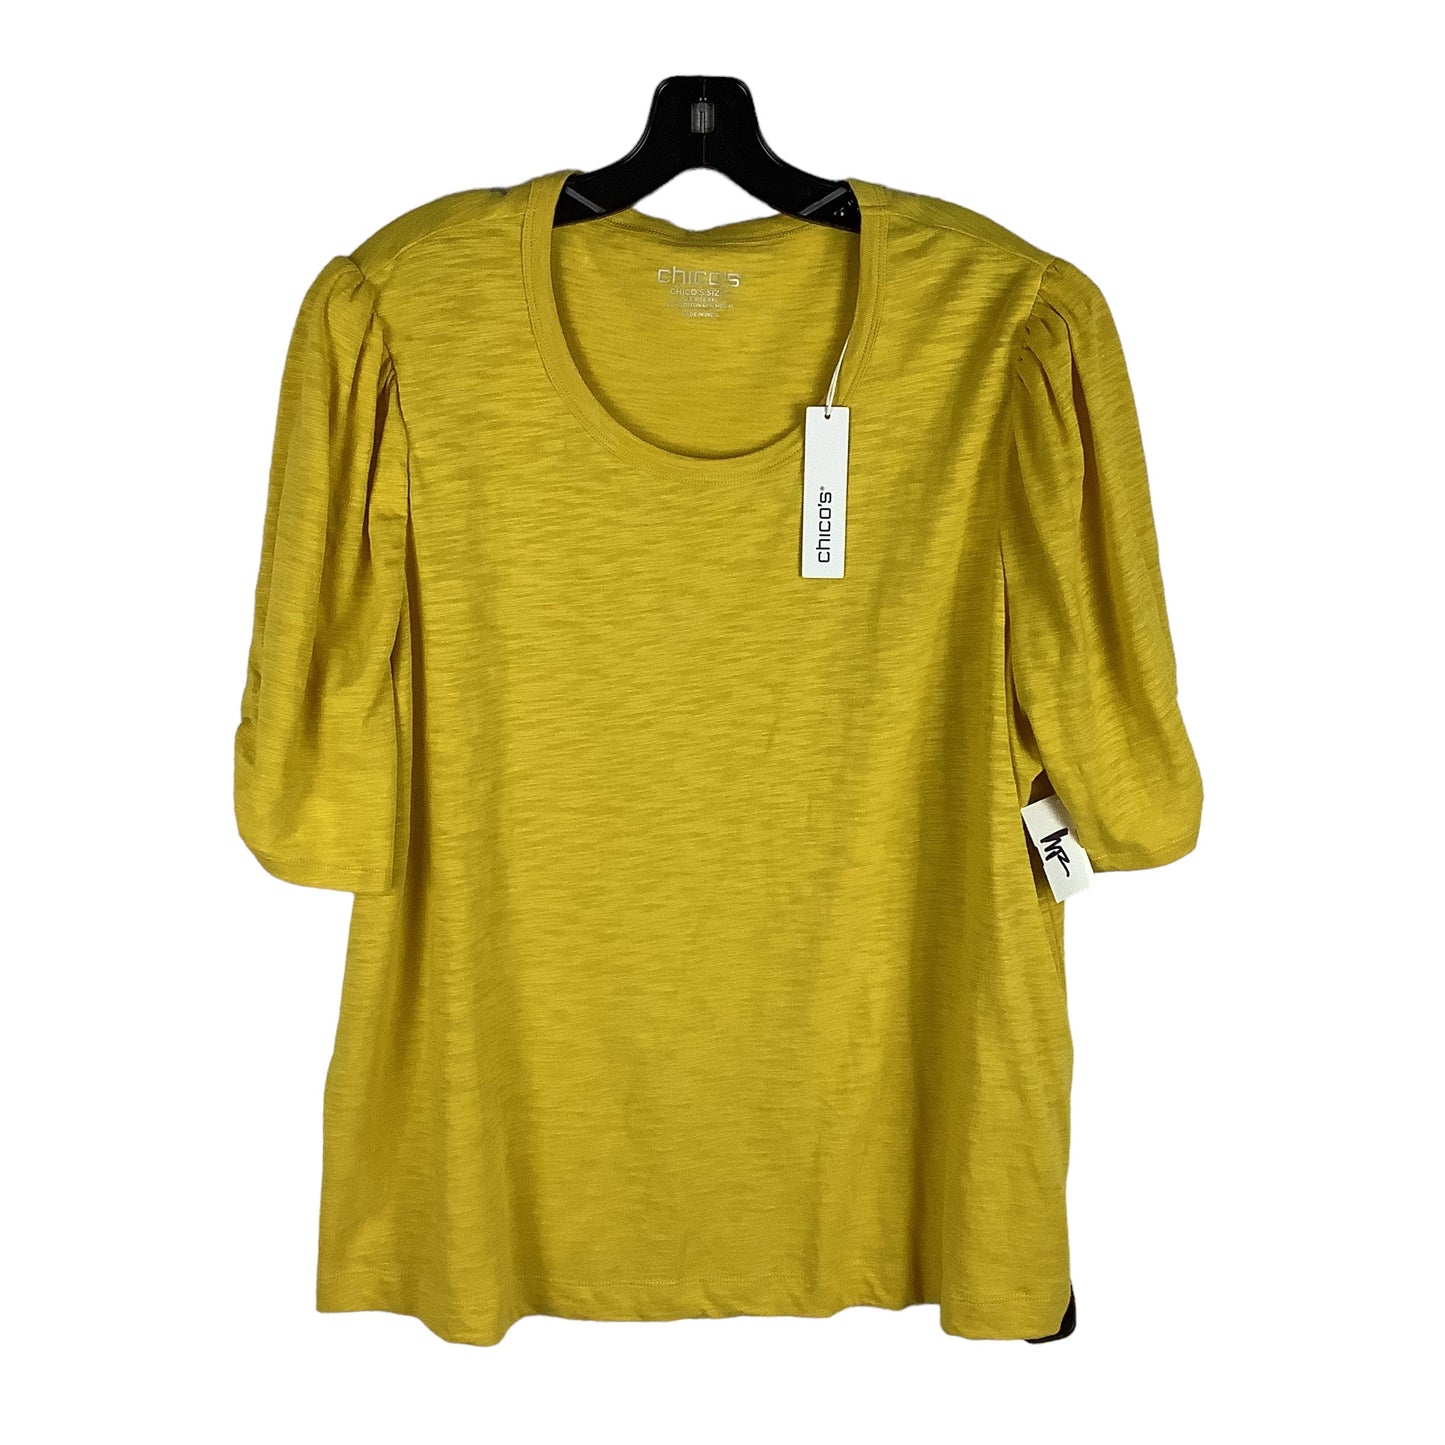 Yellow Top Short Sleeve Chicos, Size Xxl